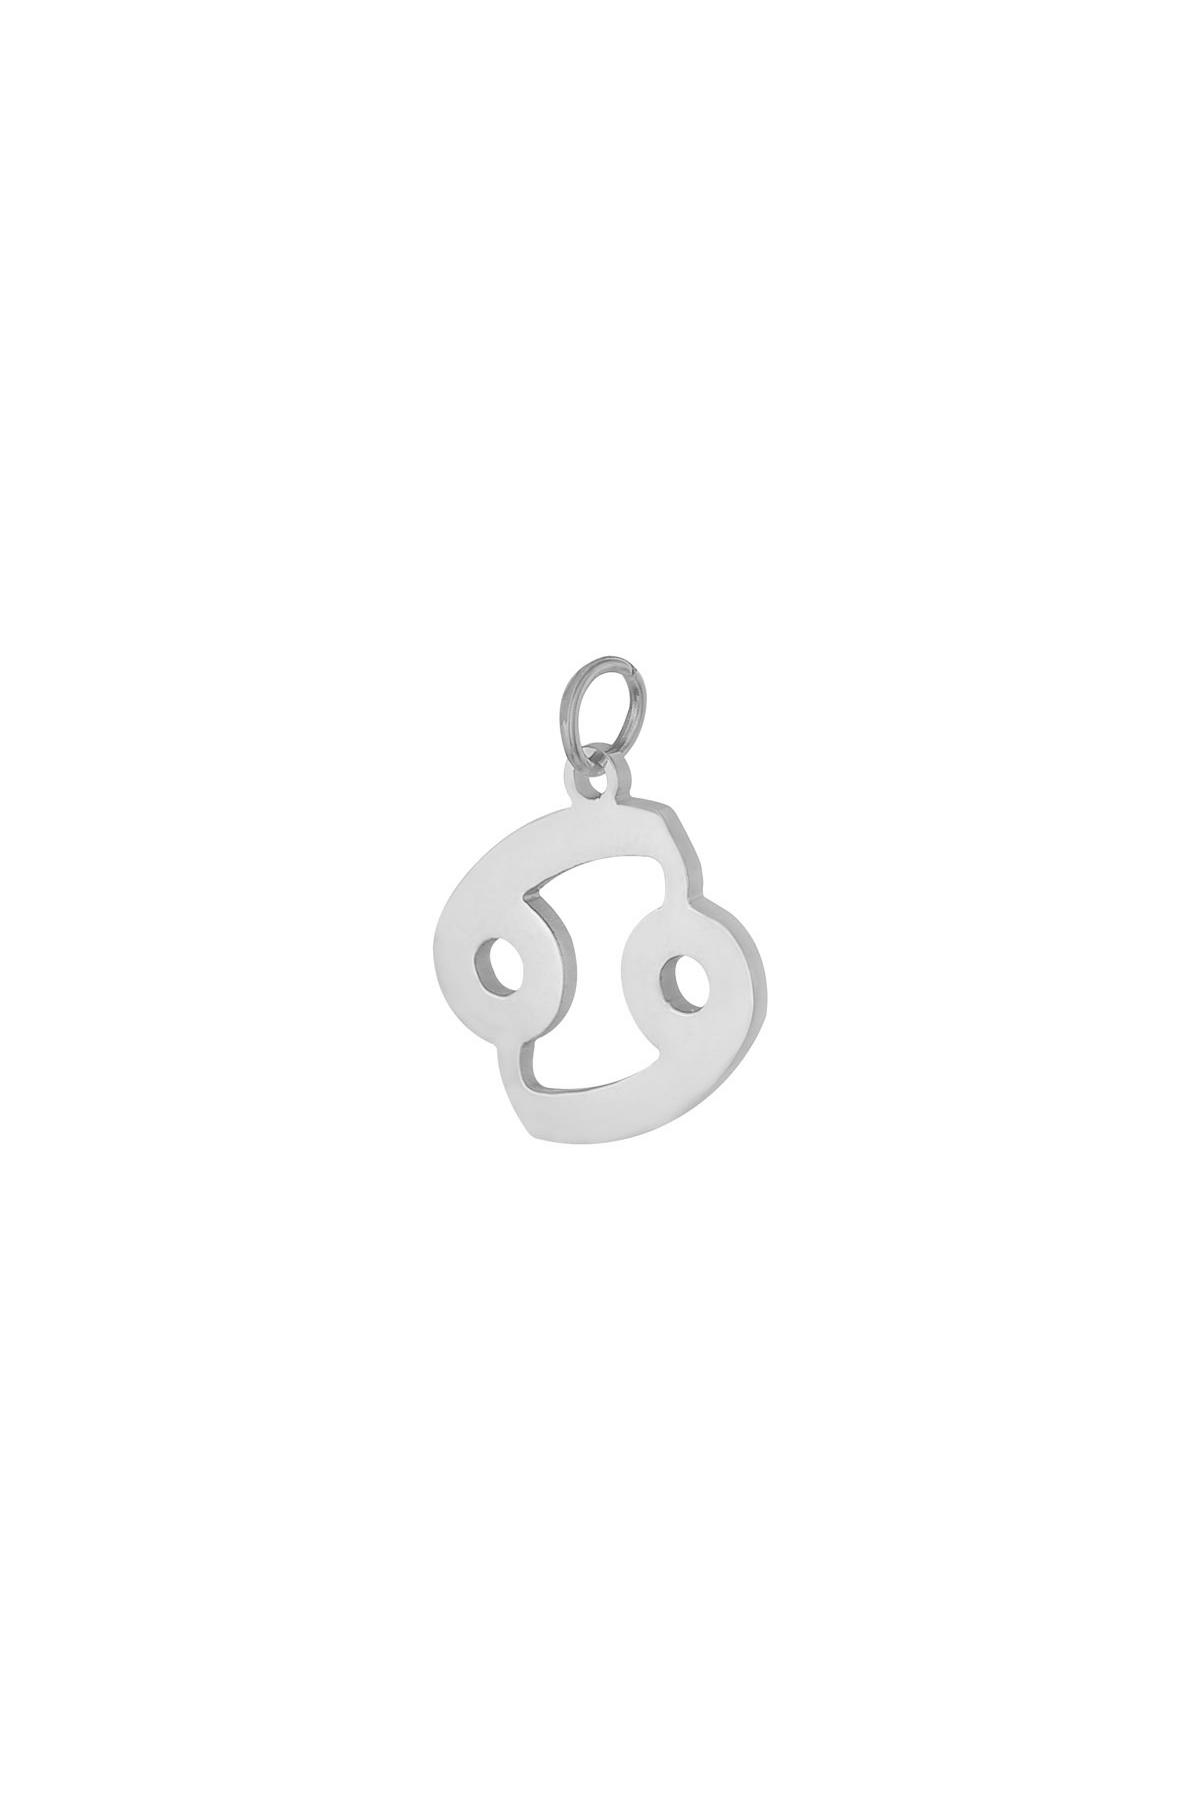 Silver / Charm Zodiac Cancer Silver Stainless Steel Picture7